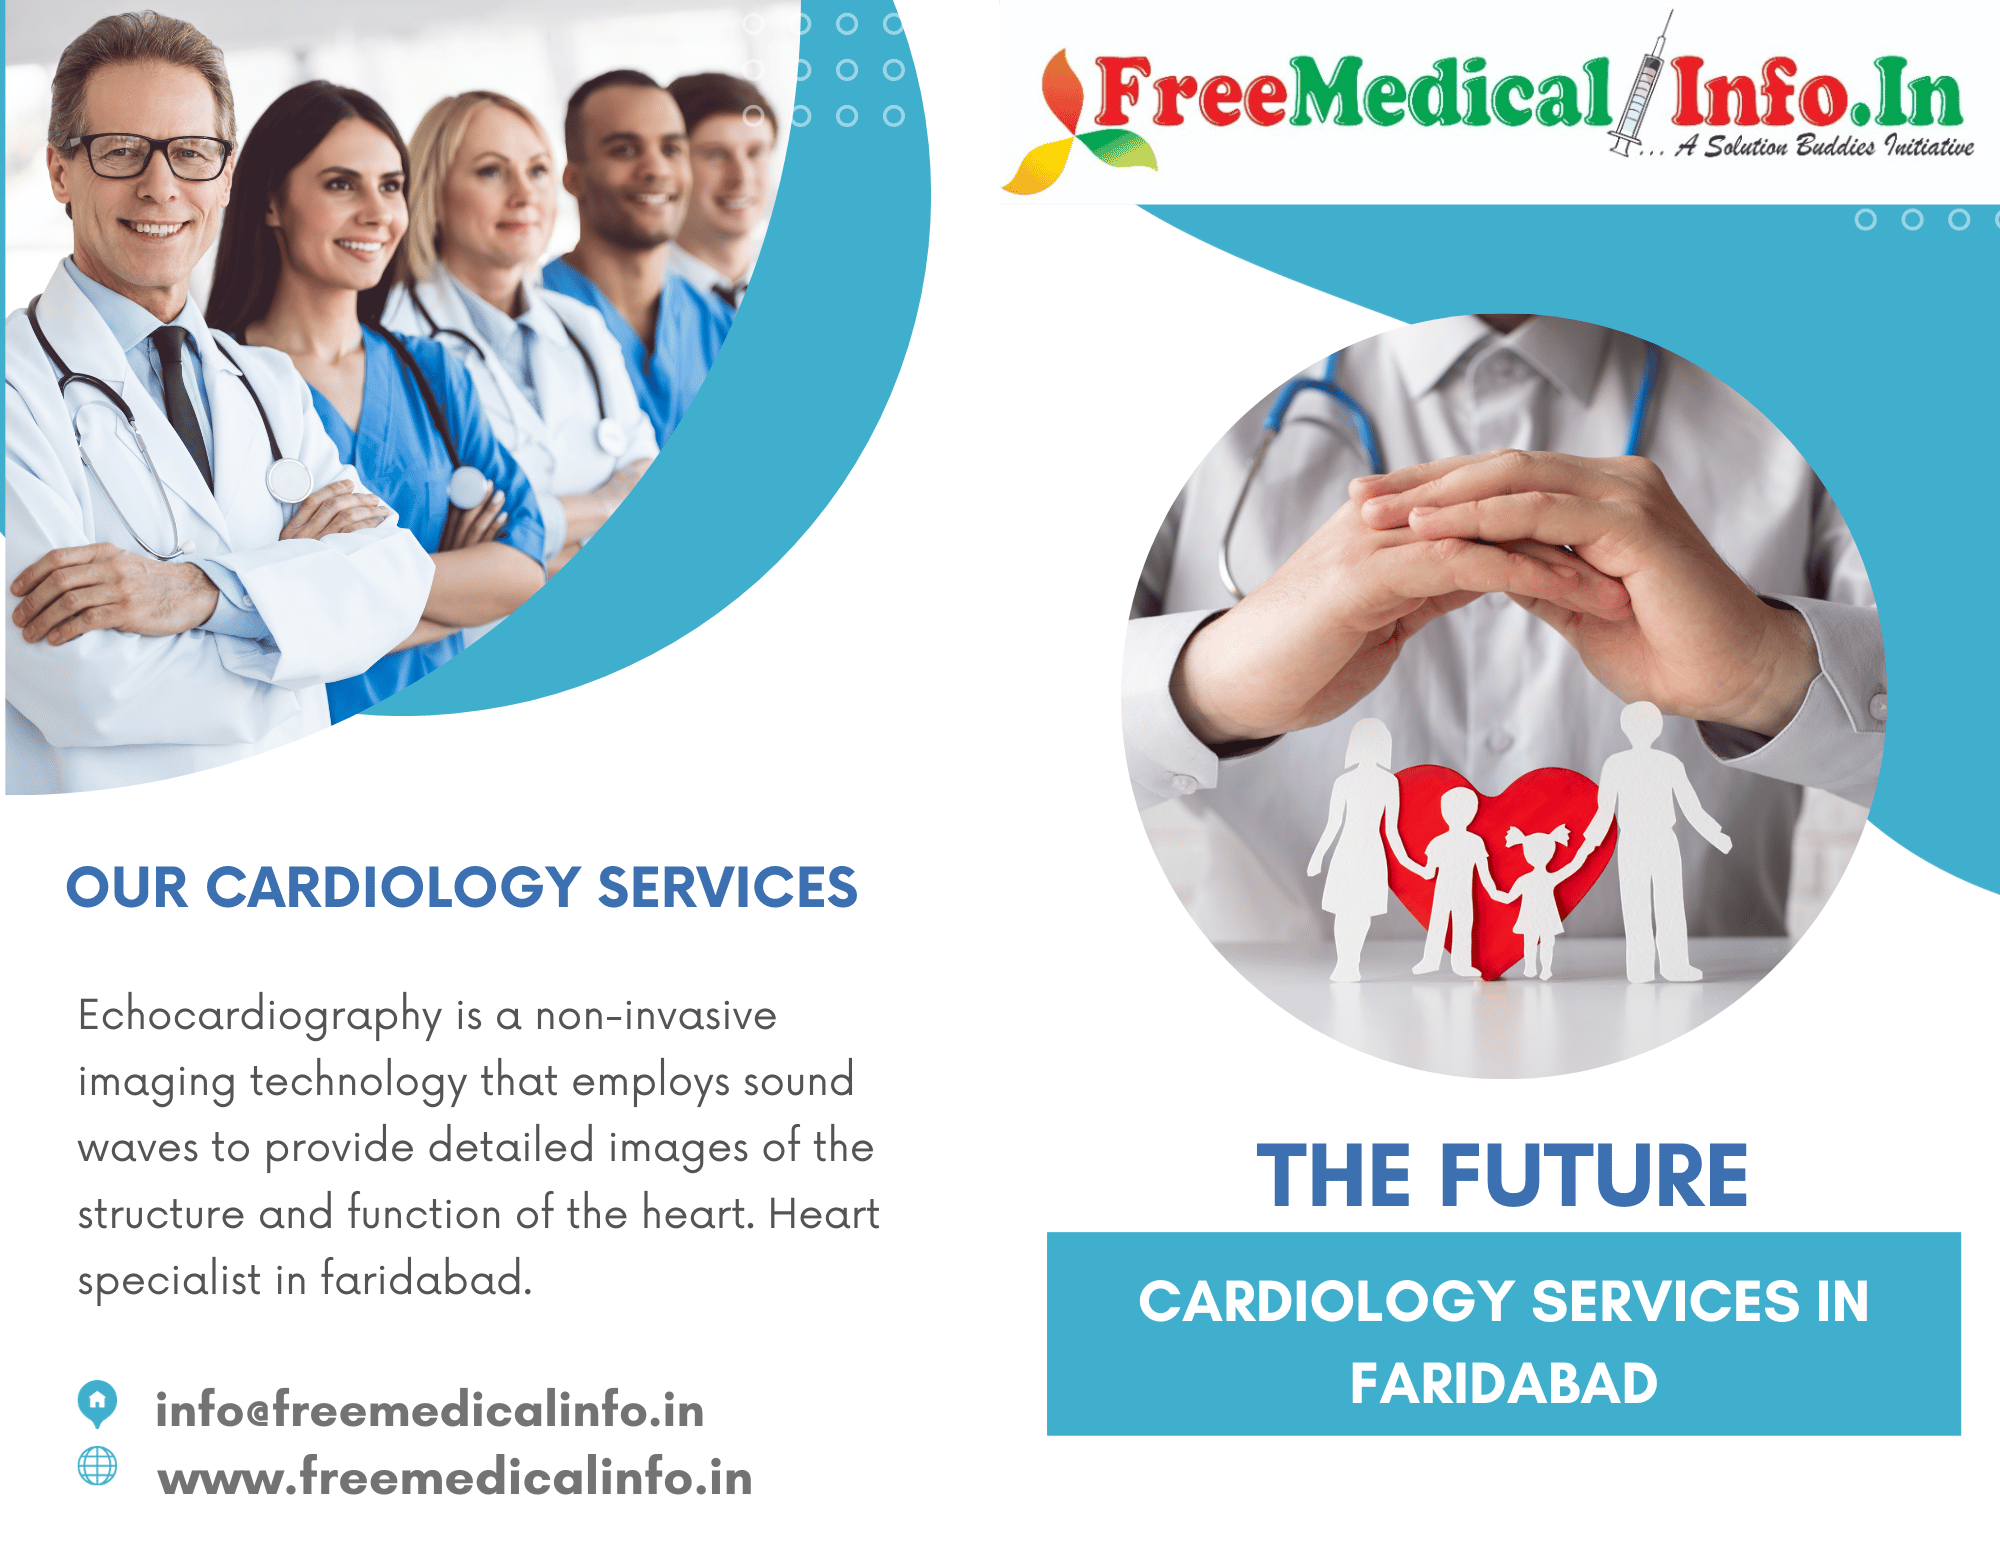 A summary of Faridabad as a city for cardiology services: Free Medical Info